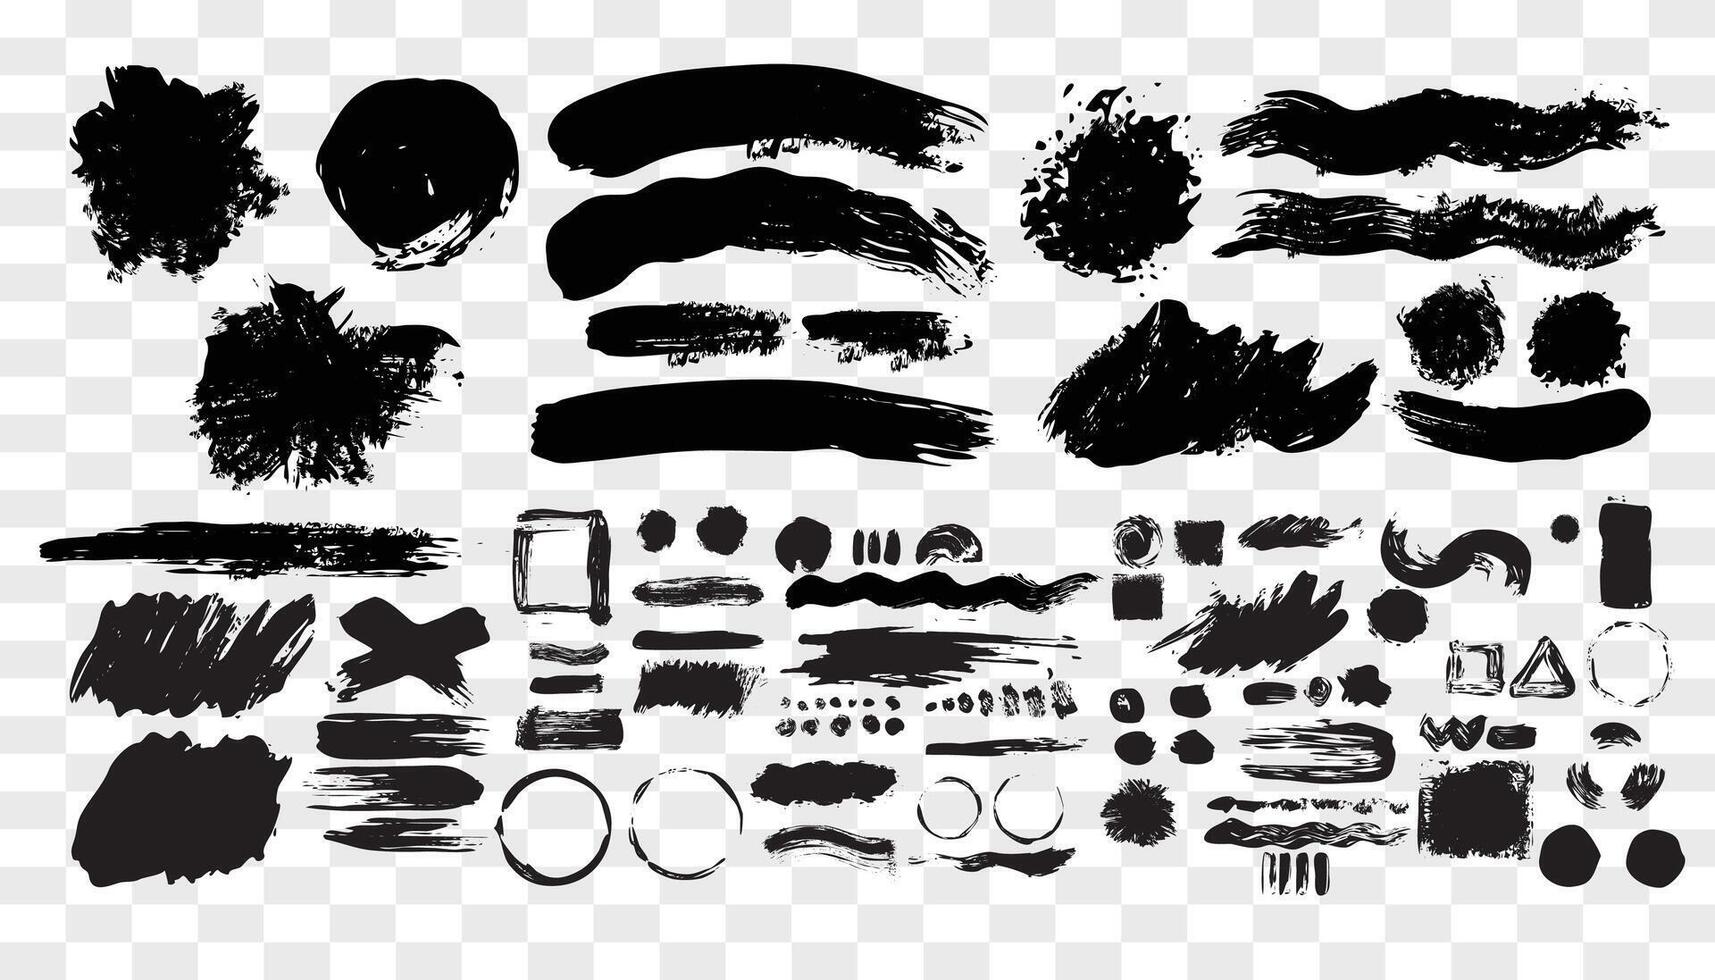 Collection black dirty design element. Grunge brush stroke, paint artistic set. Grunge texture collection vector